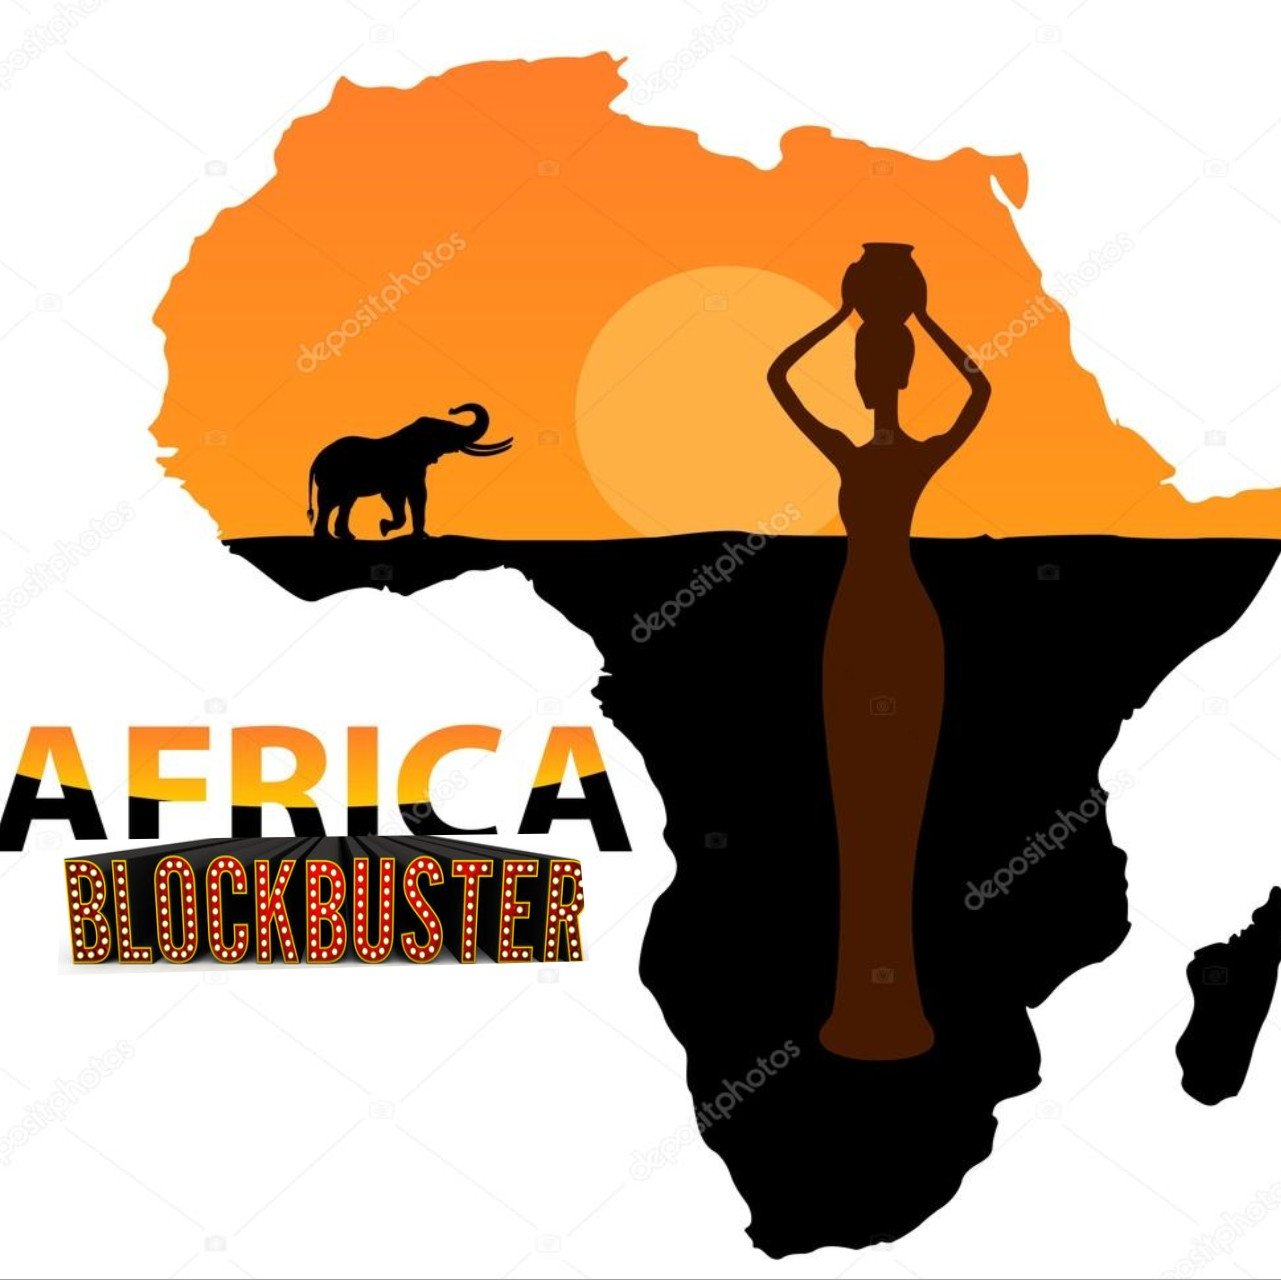 We Bring to the World the Best Of Africa Movies such as: Cinema, TV Series,Documentaries,Interviews, Movie Premieres and many more.
Subscribe To Our Youtube